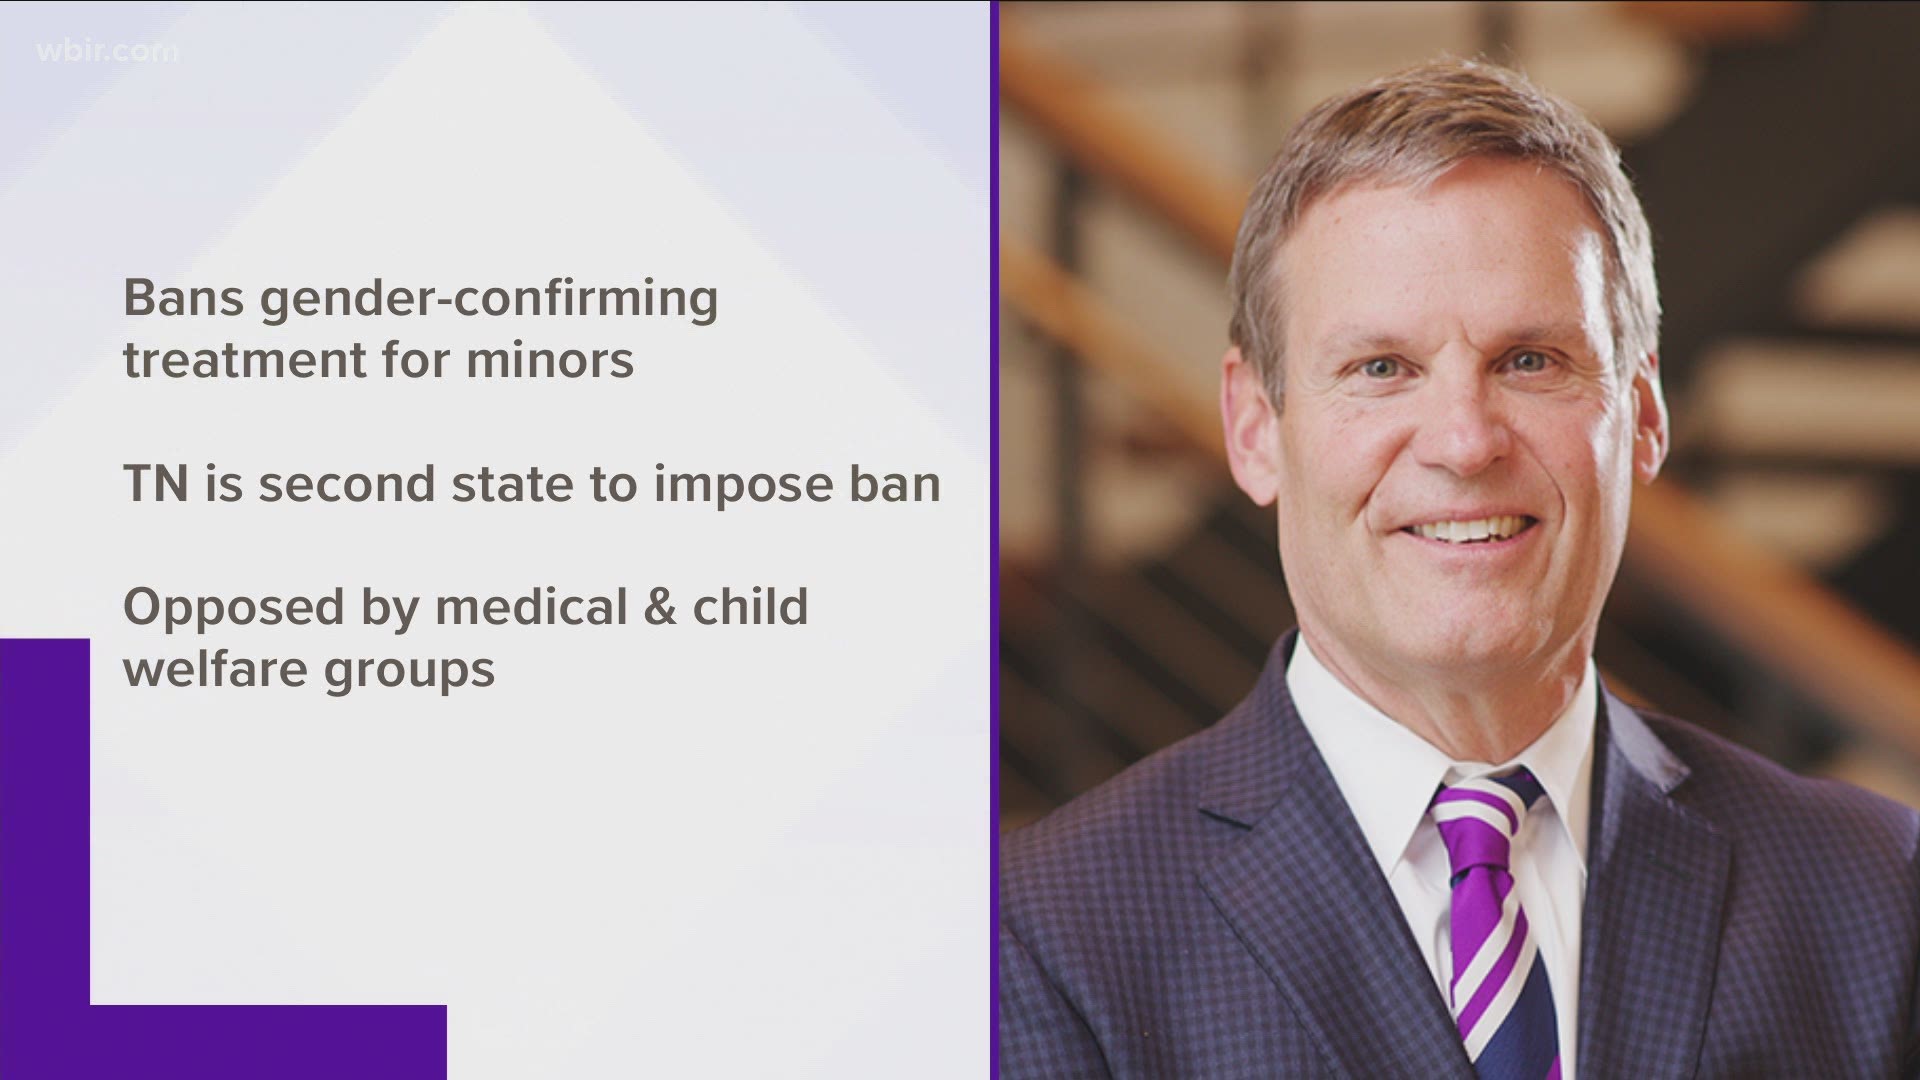 This week Gov. Bill Lee approved legislation that bans gender-confirming treatment for minors before they reach puberty.